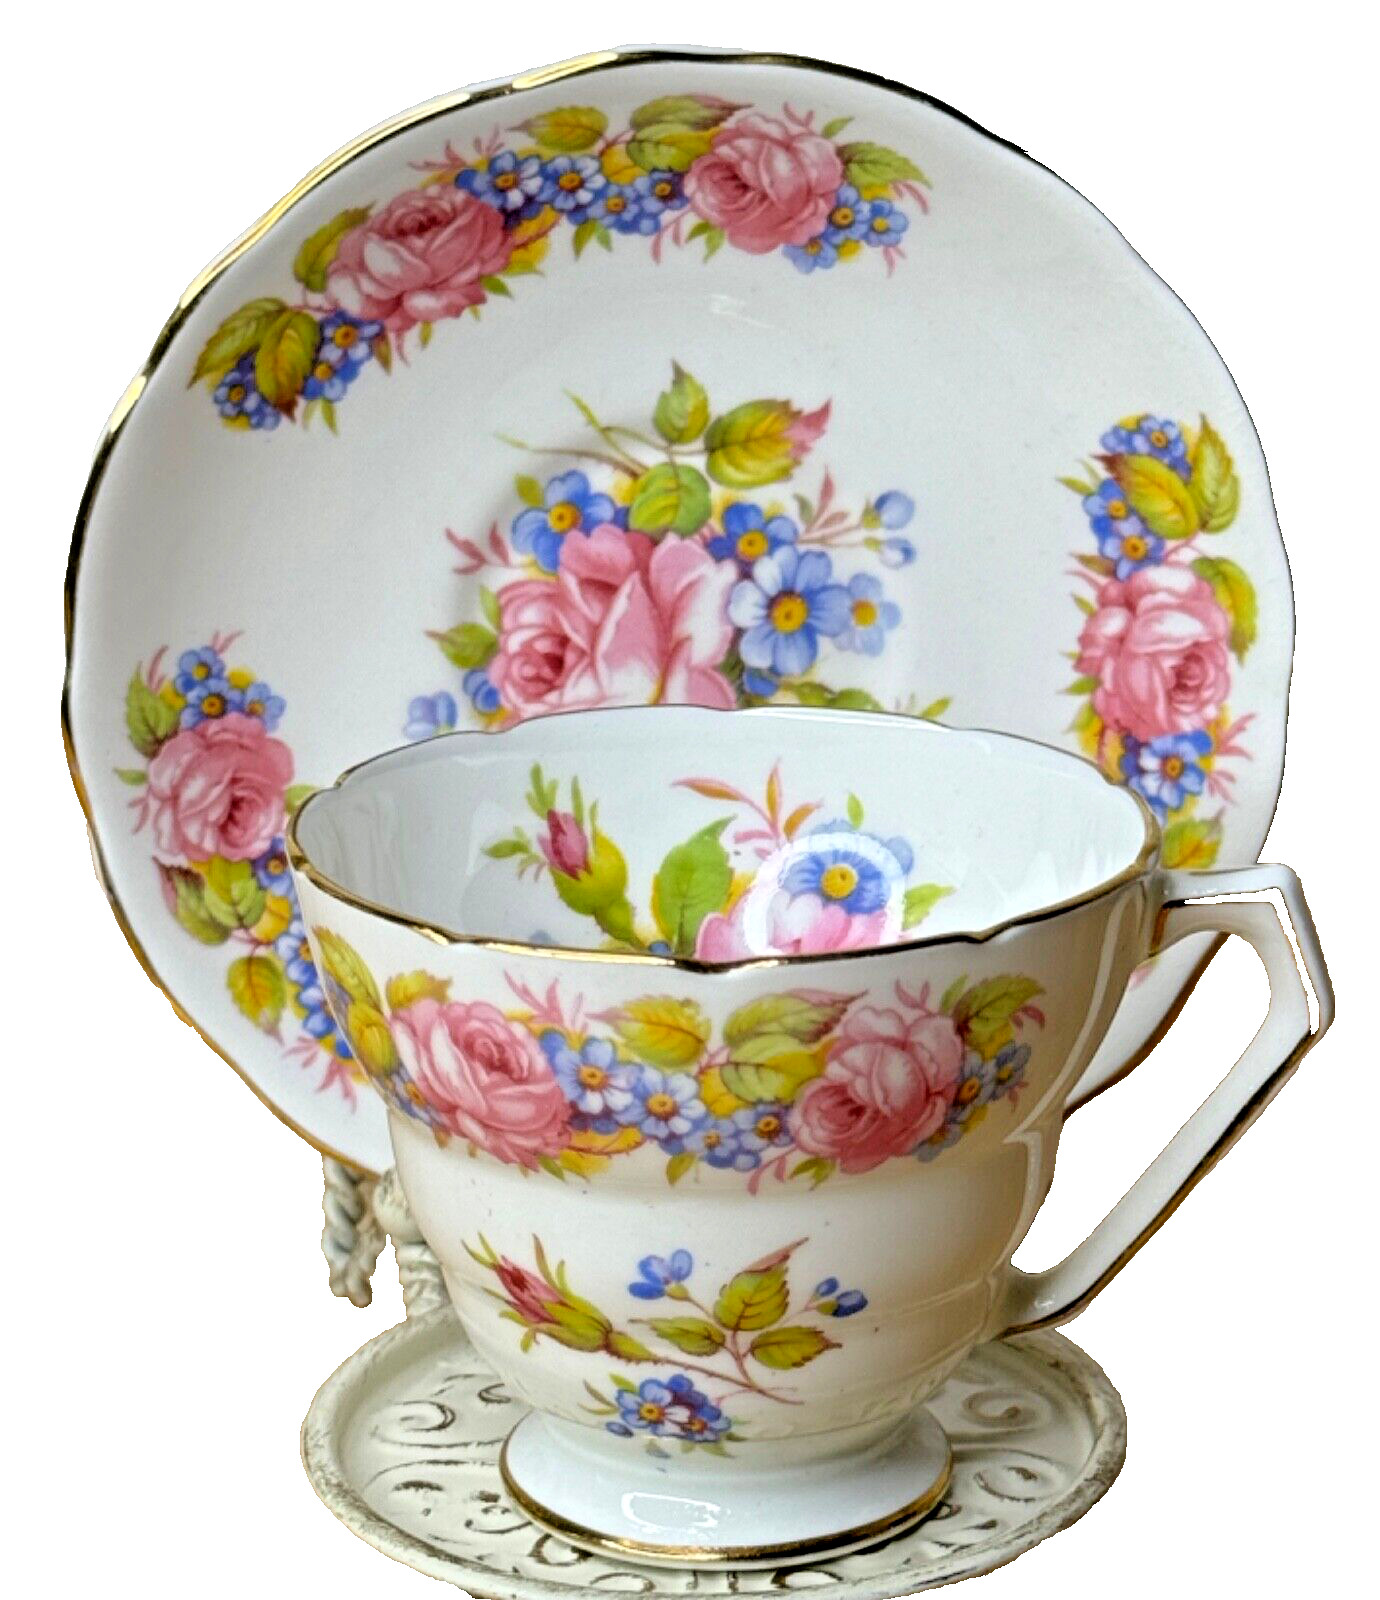 RADFORD\'S Bone China Tea Cup and Saucer - Rose Pattern - England 1940s